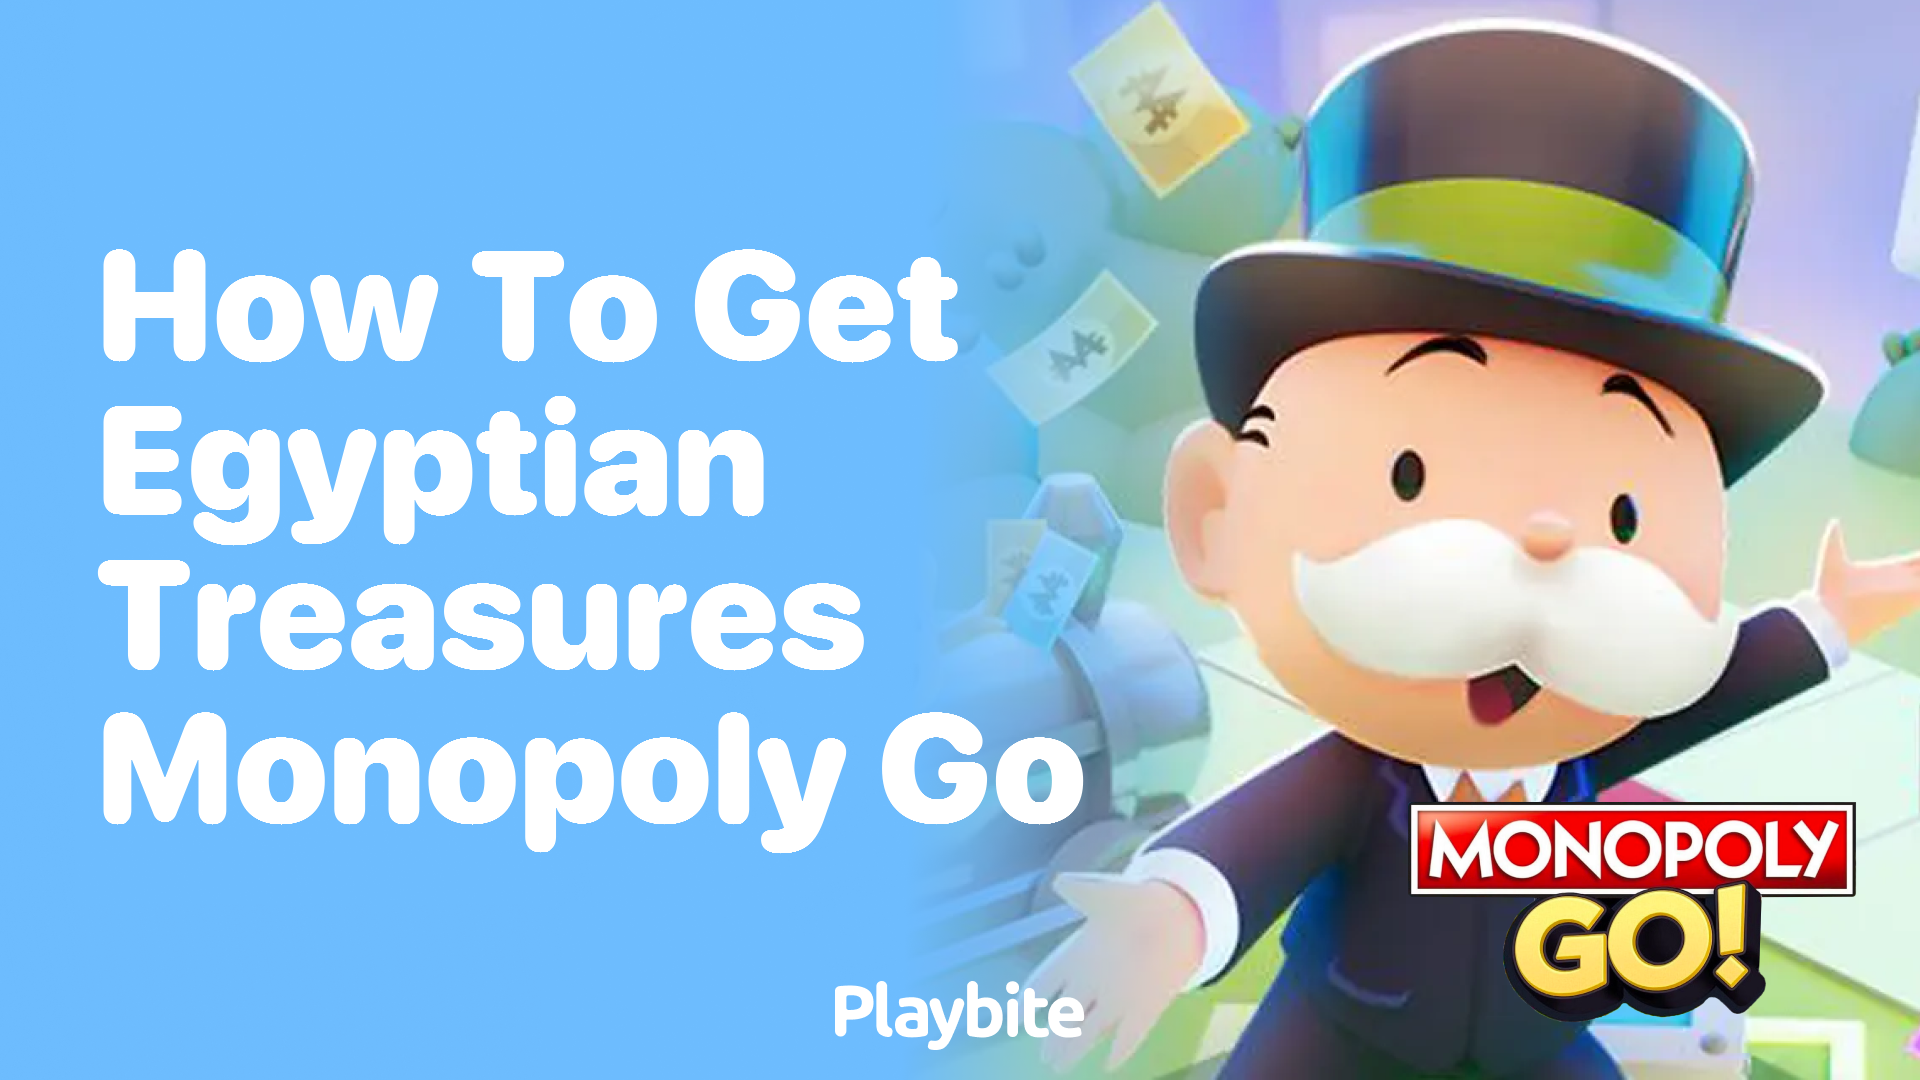 How to Get Egyptian Treasures in Monopoly Go